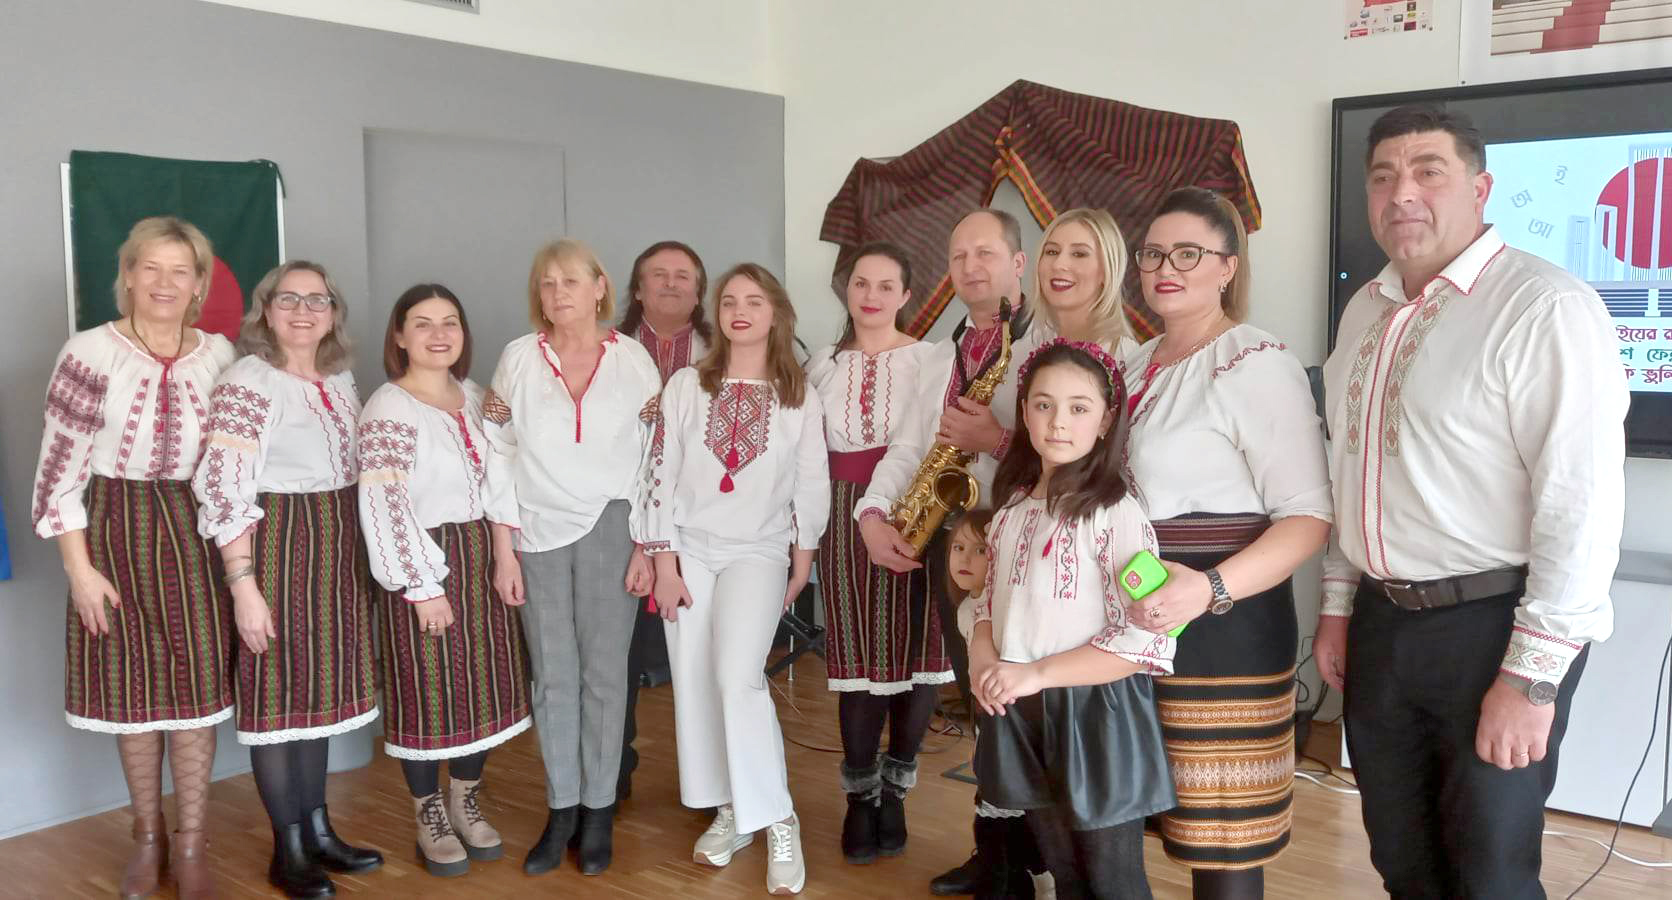 The diaspora from Italy celebrated International Mother Language Day